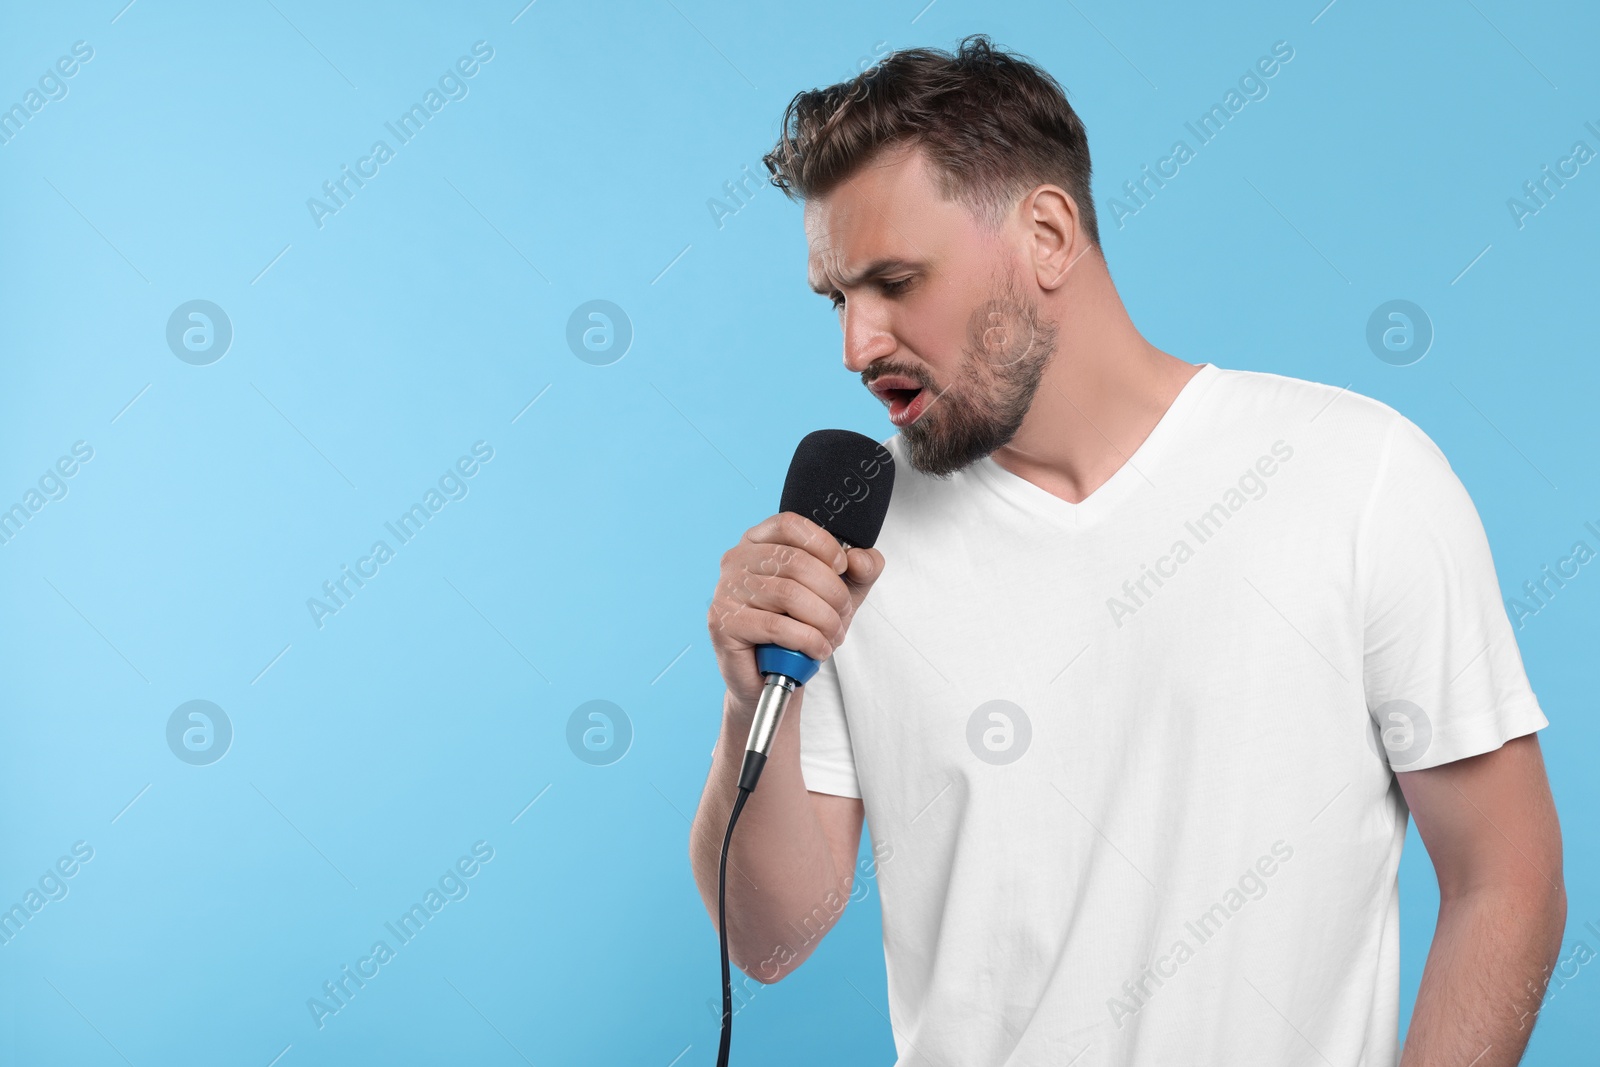 Photo of Handsome man with microphone singing on light blue background. Space for text